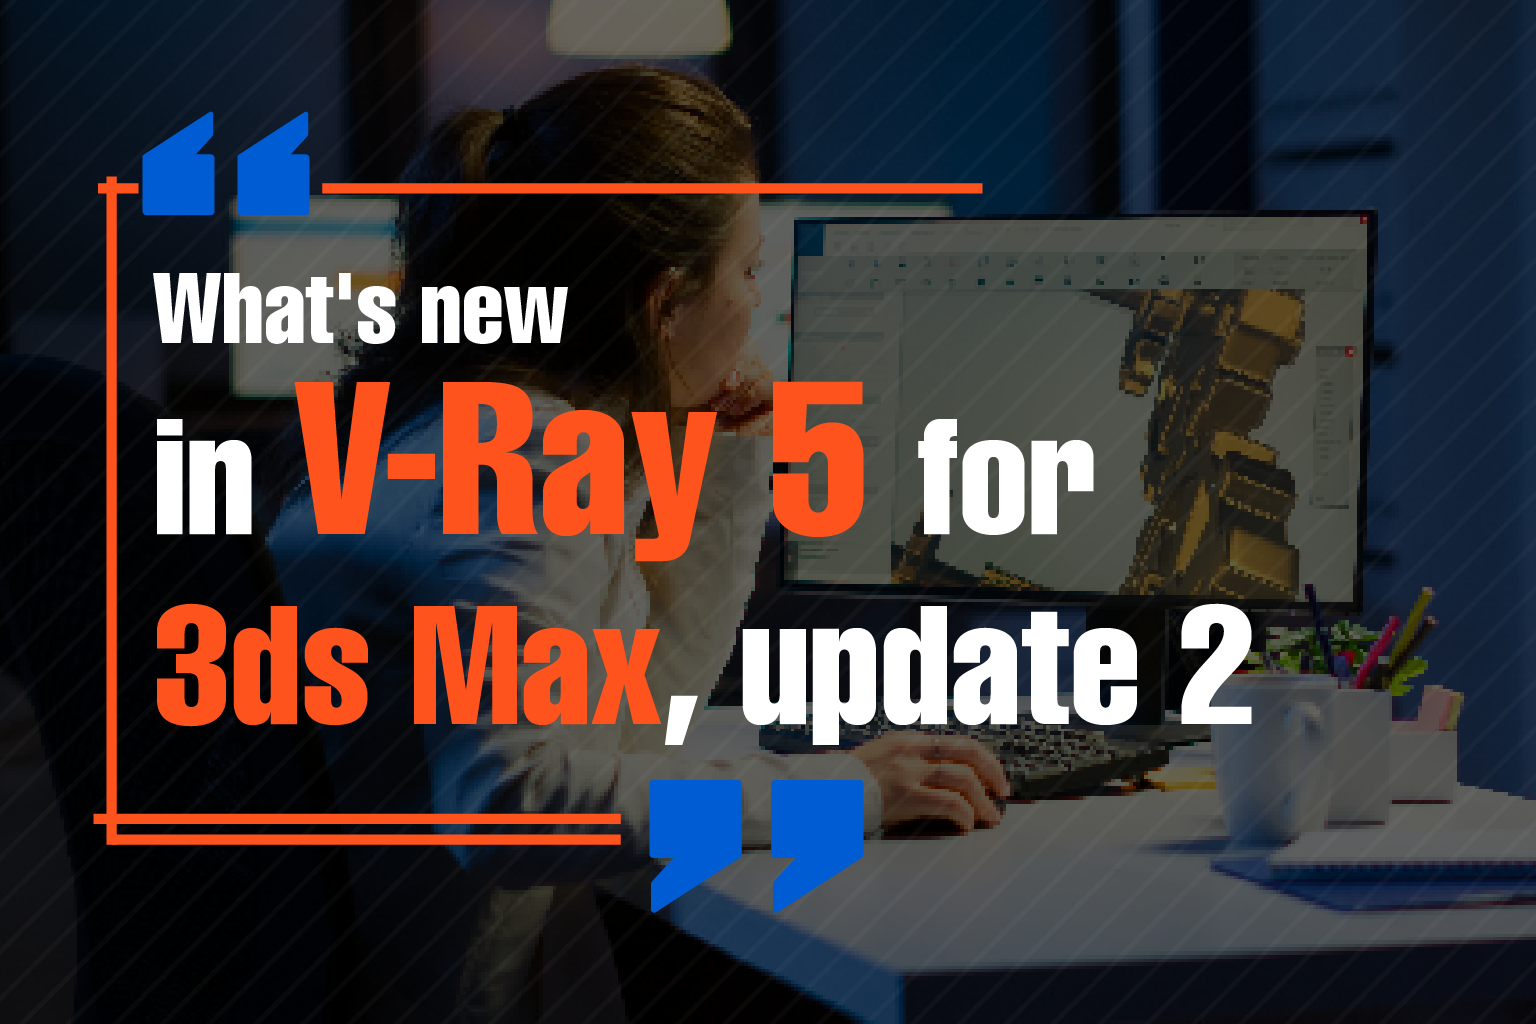 What's new in V-Ray 5 for 3ds Max, update 2